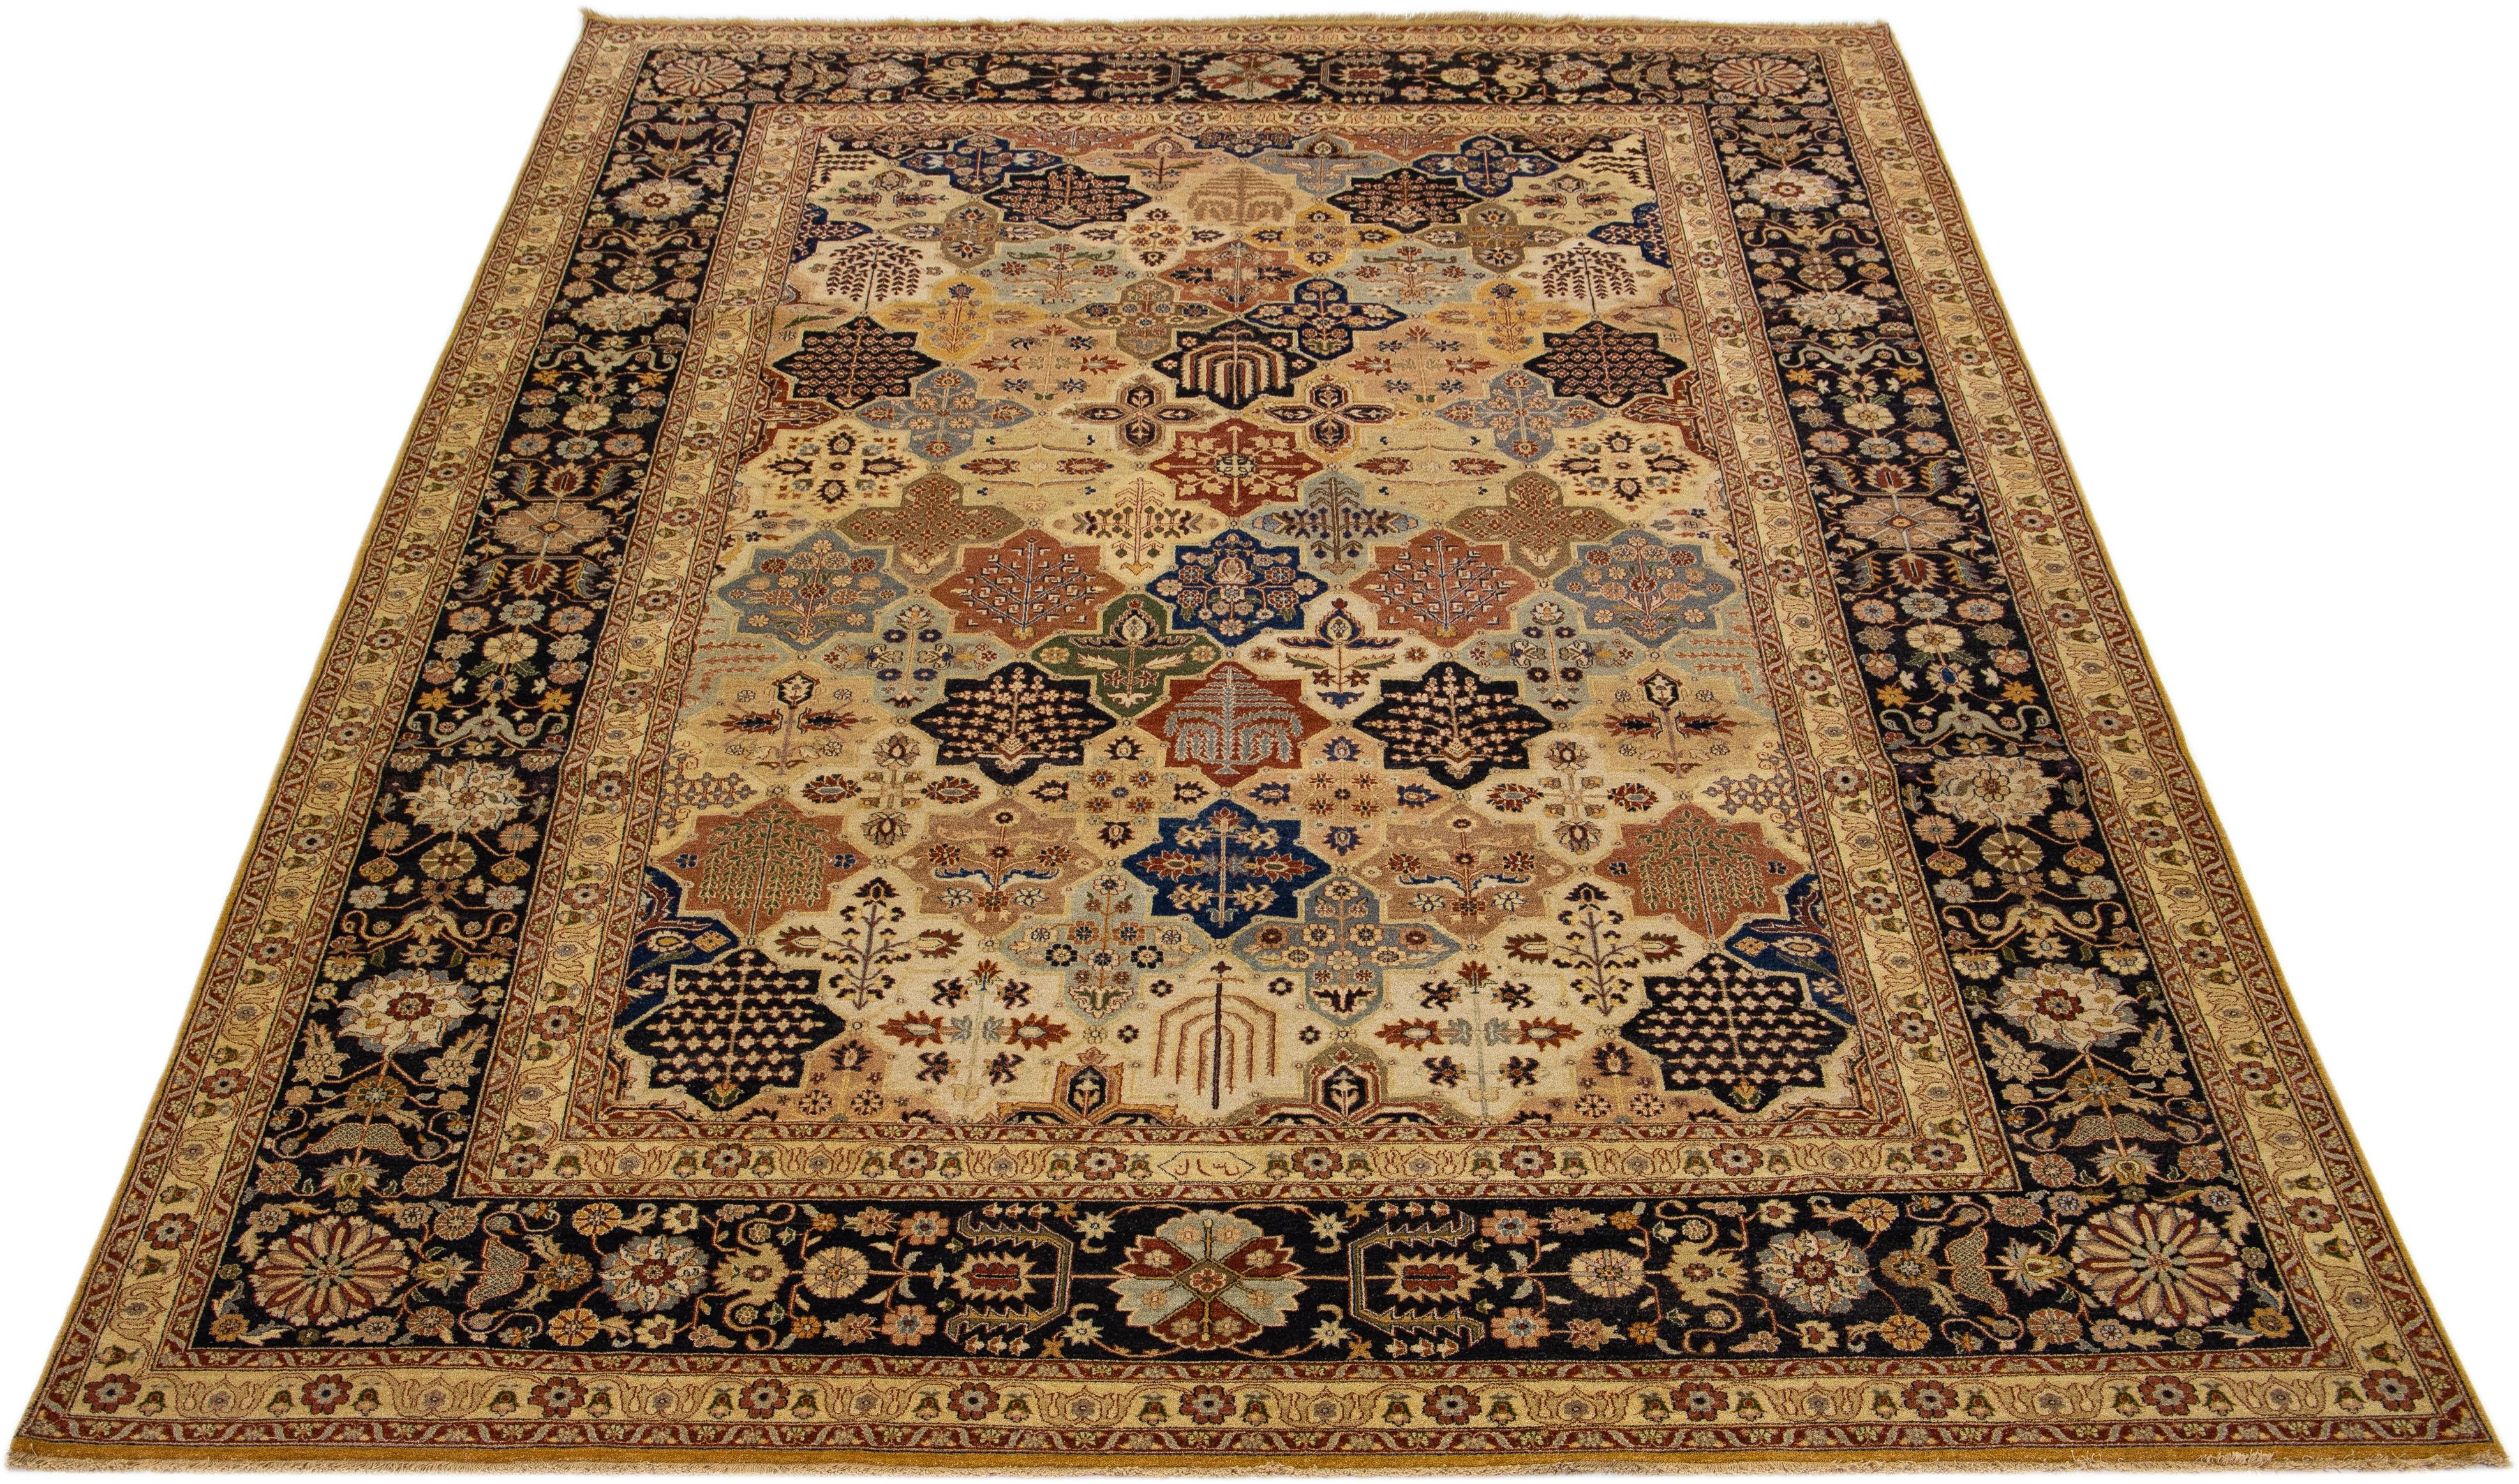 Beautiful modern Tabriz-style hand-knotted wool rug with a tan color field. This piece has a dark blue frame, multicolor accents, and a gorgeous all-over floral design.

This rug measures 9'10